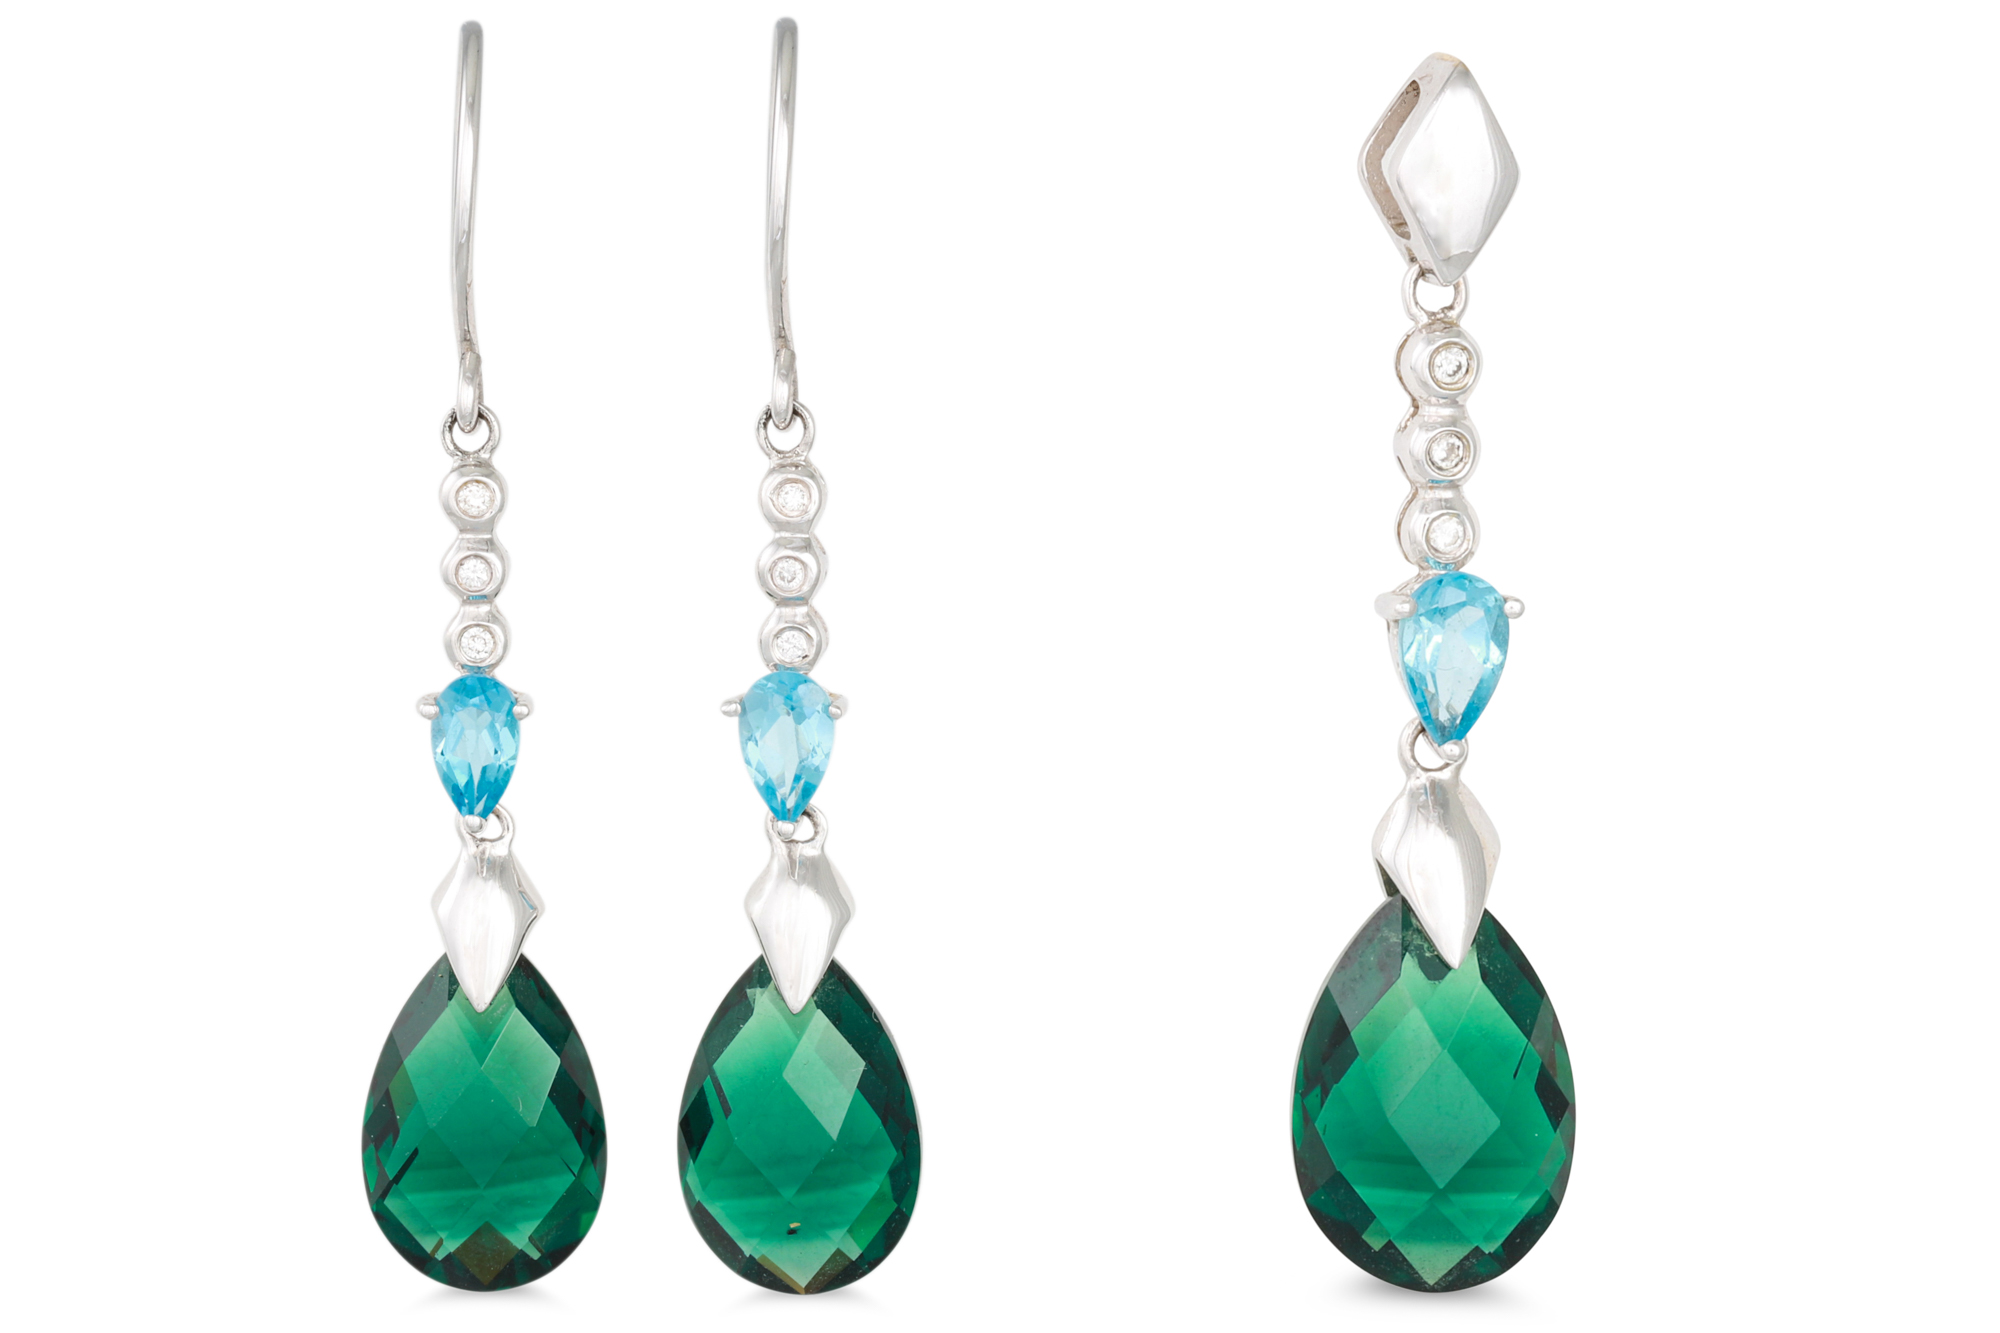 A PAIR OF TOPAZ AND GREEN GEMSTONE DROP EARRINGS, mounted in 18ct gold, with matching pendant